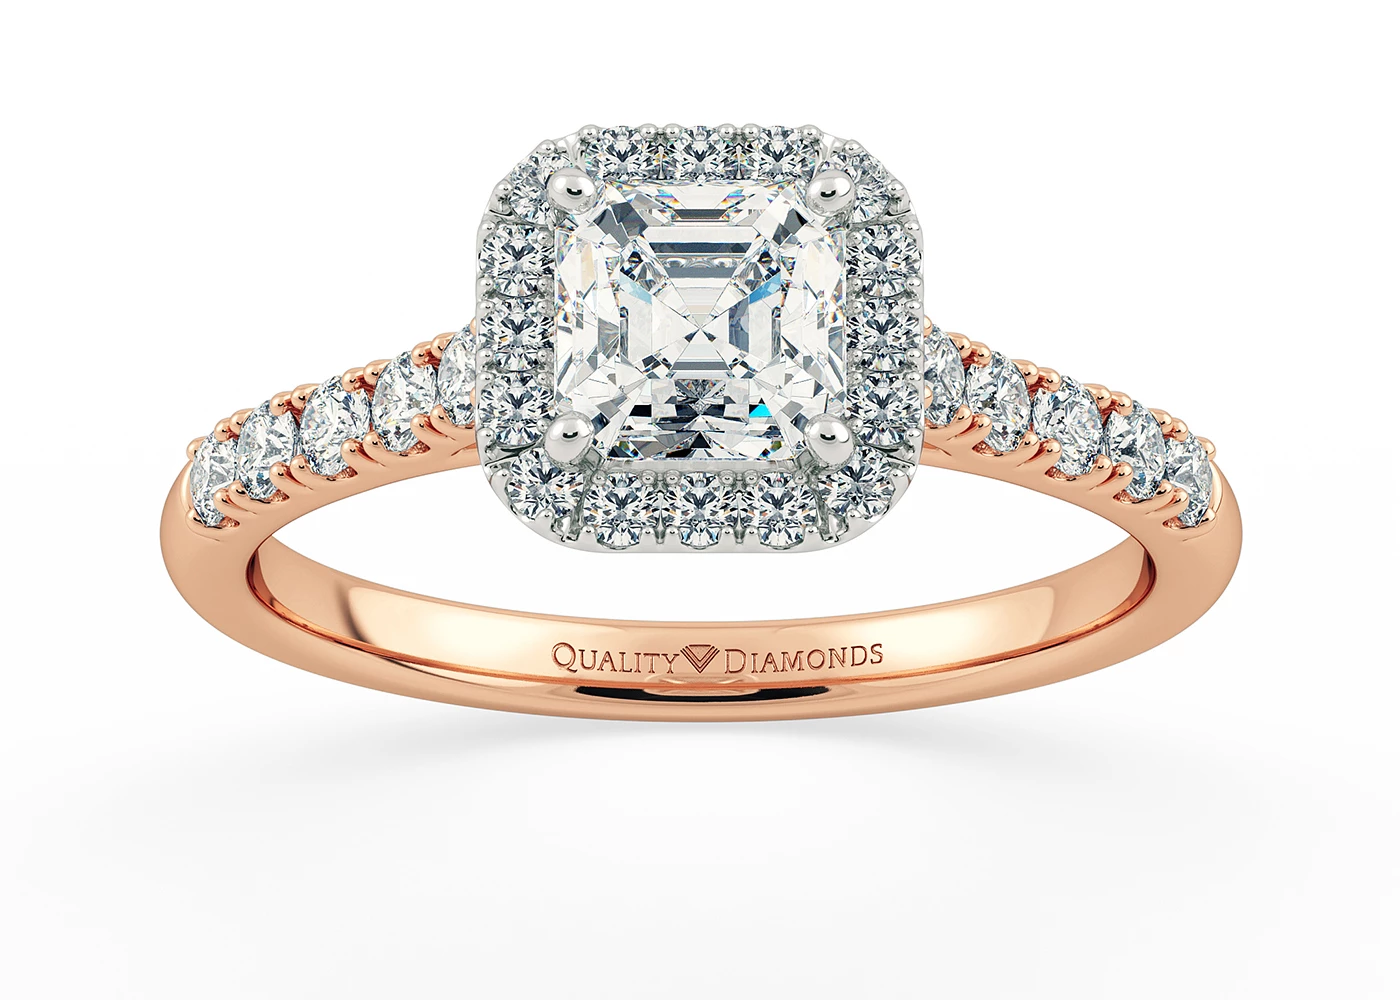 Two Carat Halo Asscher Diamond Ring in 18K Rose Gold